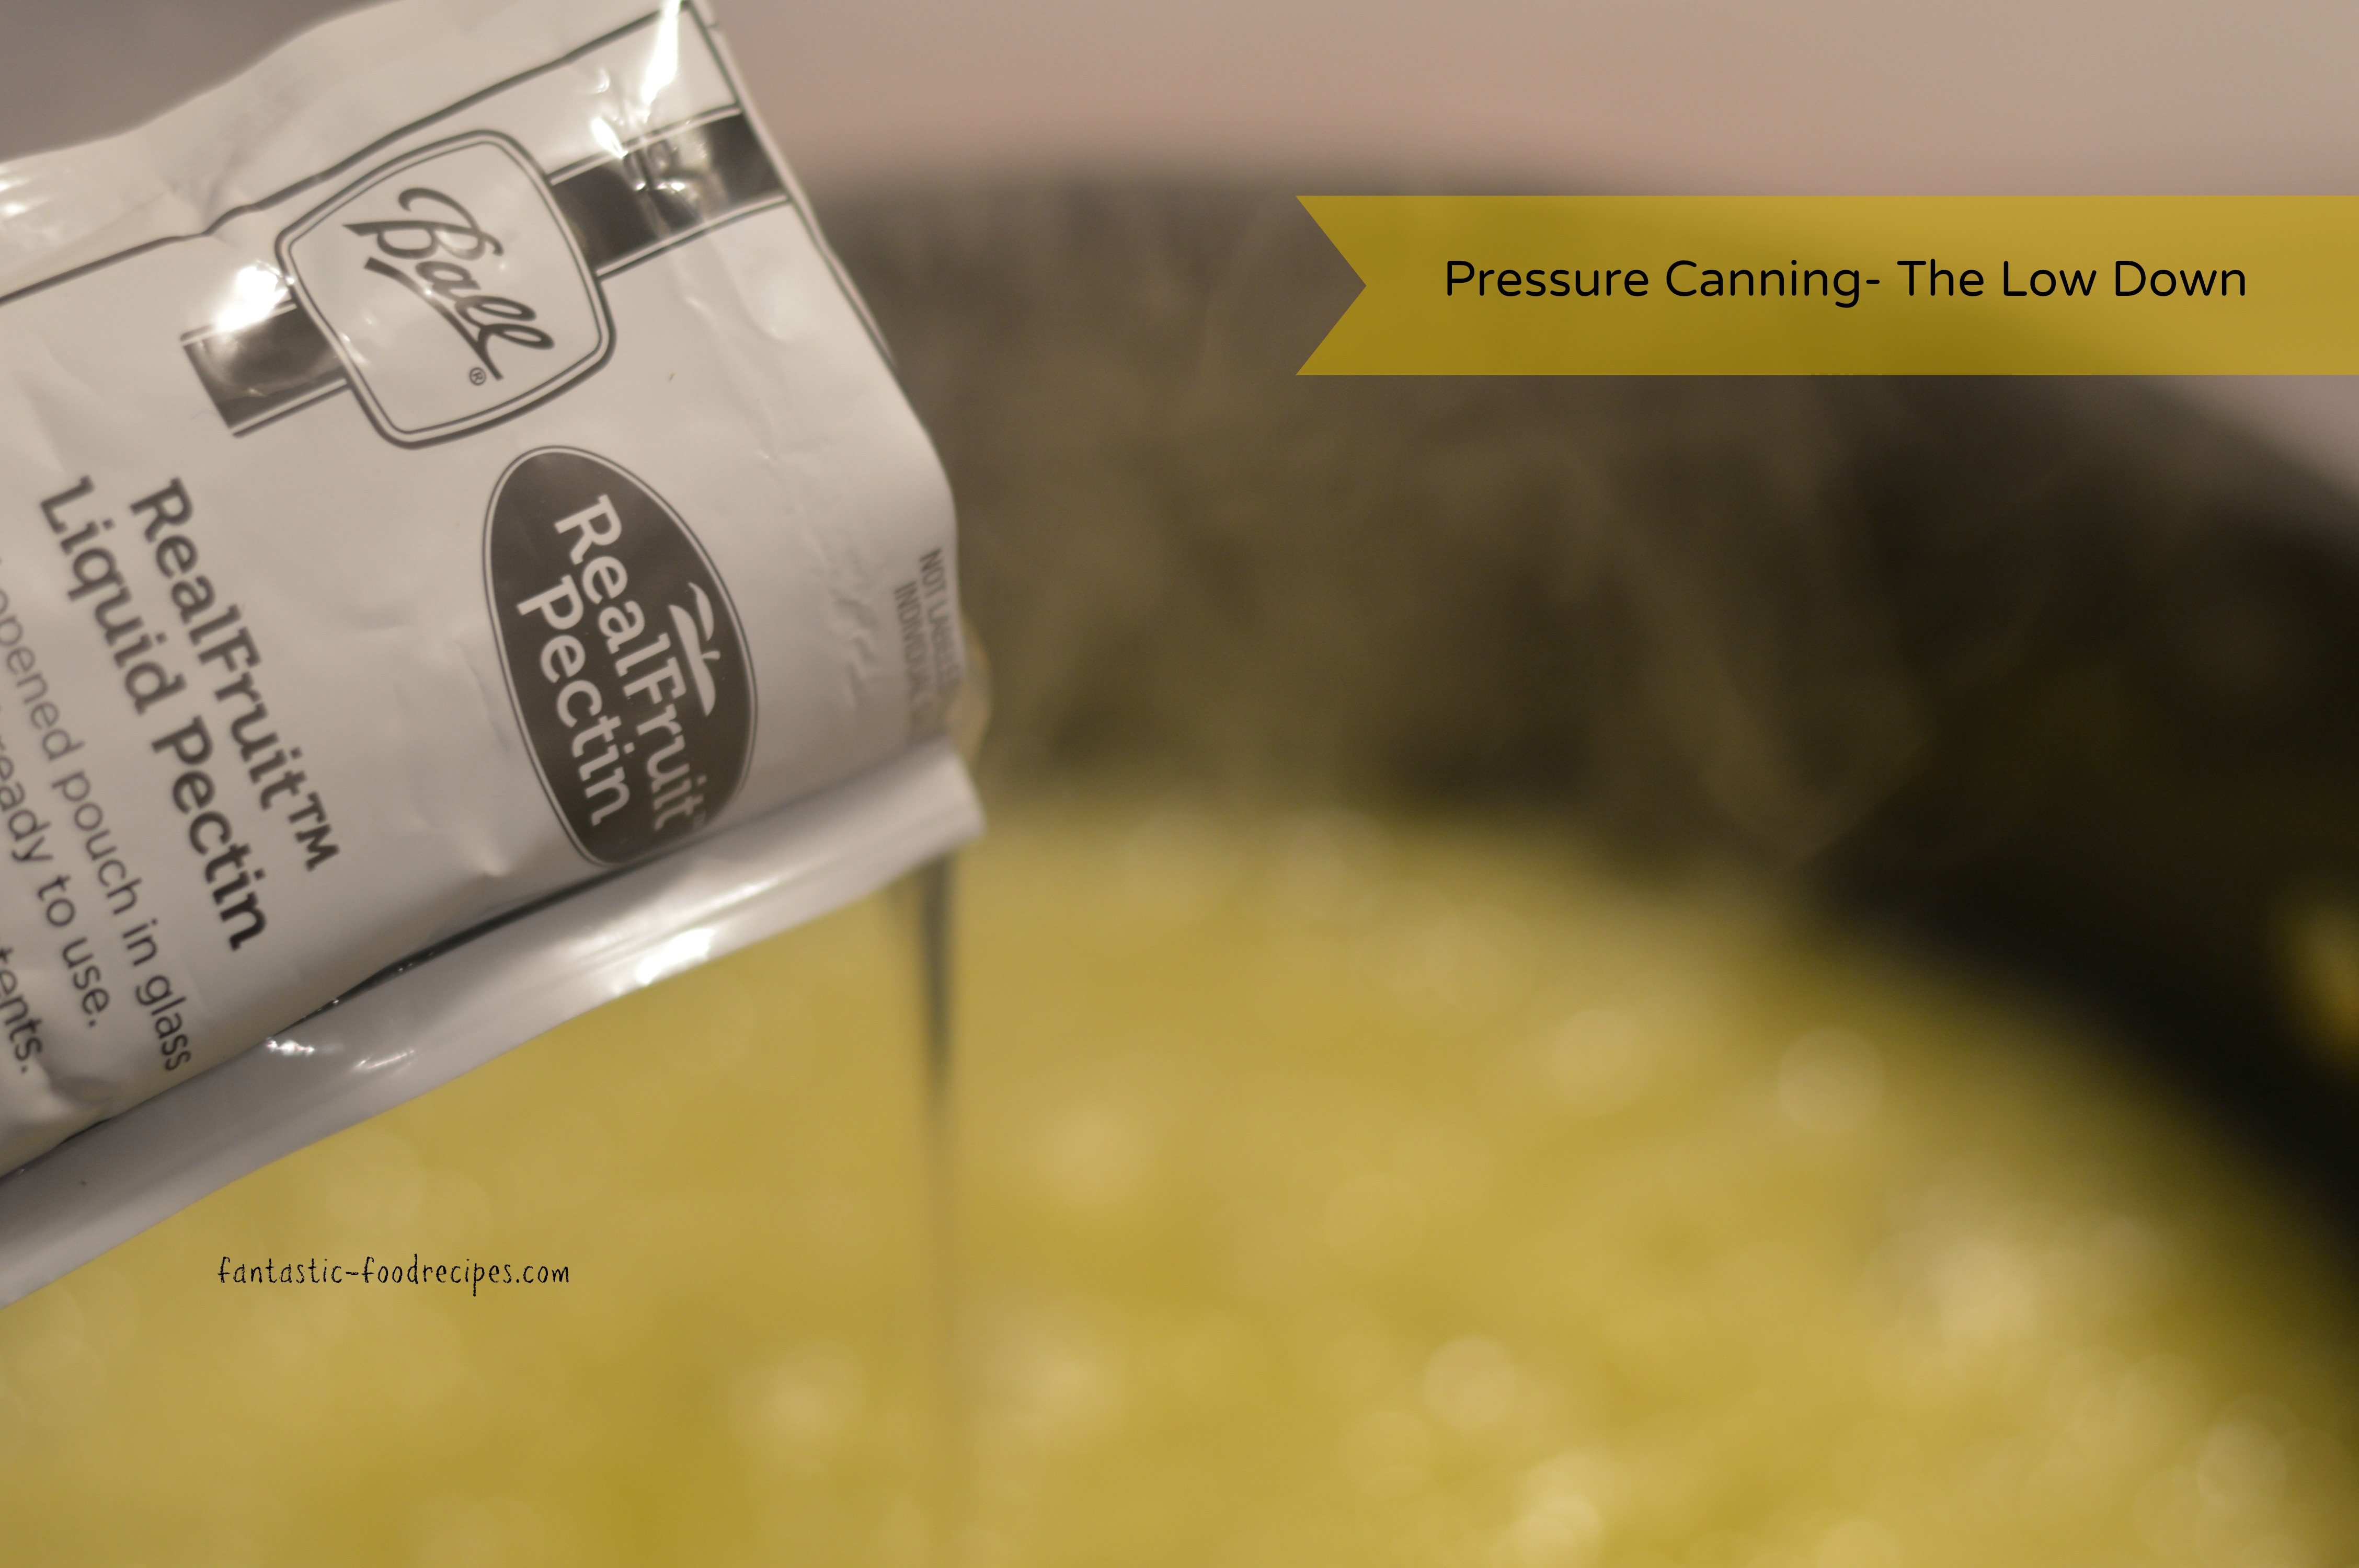 Pressure Canning- The Low Down